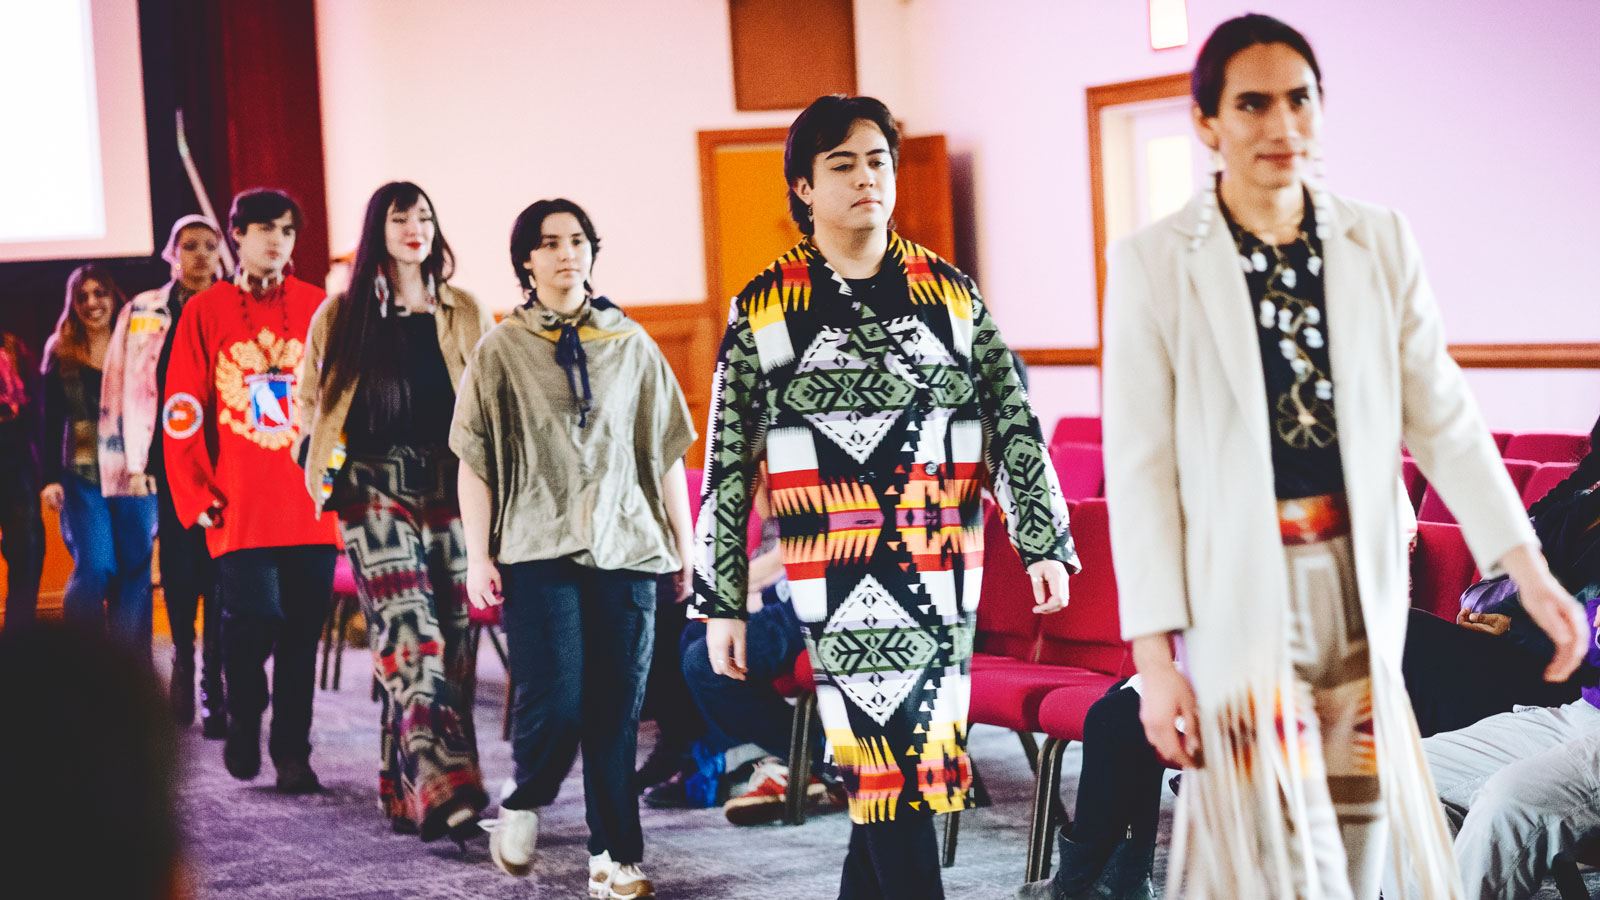 Native American students walk the runway at Rematriation: The Fashion Show at Cornell.